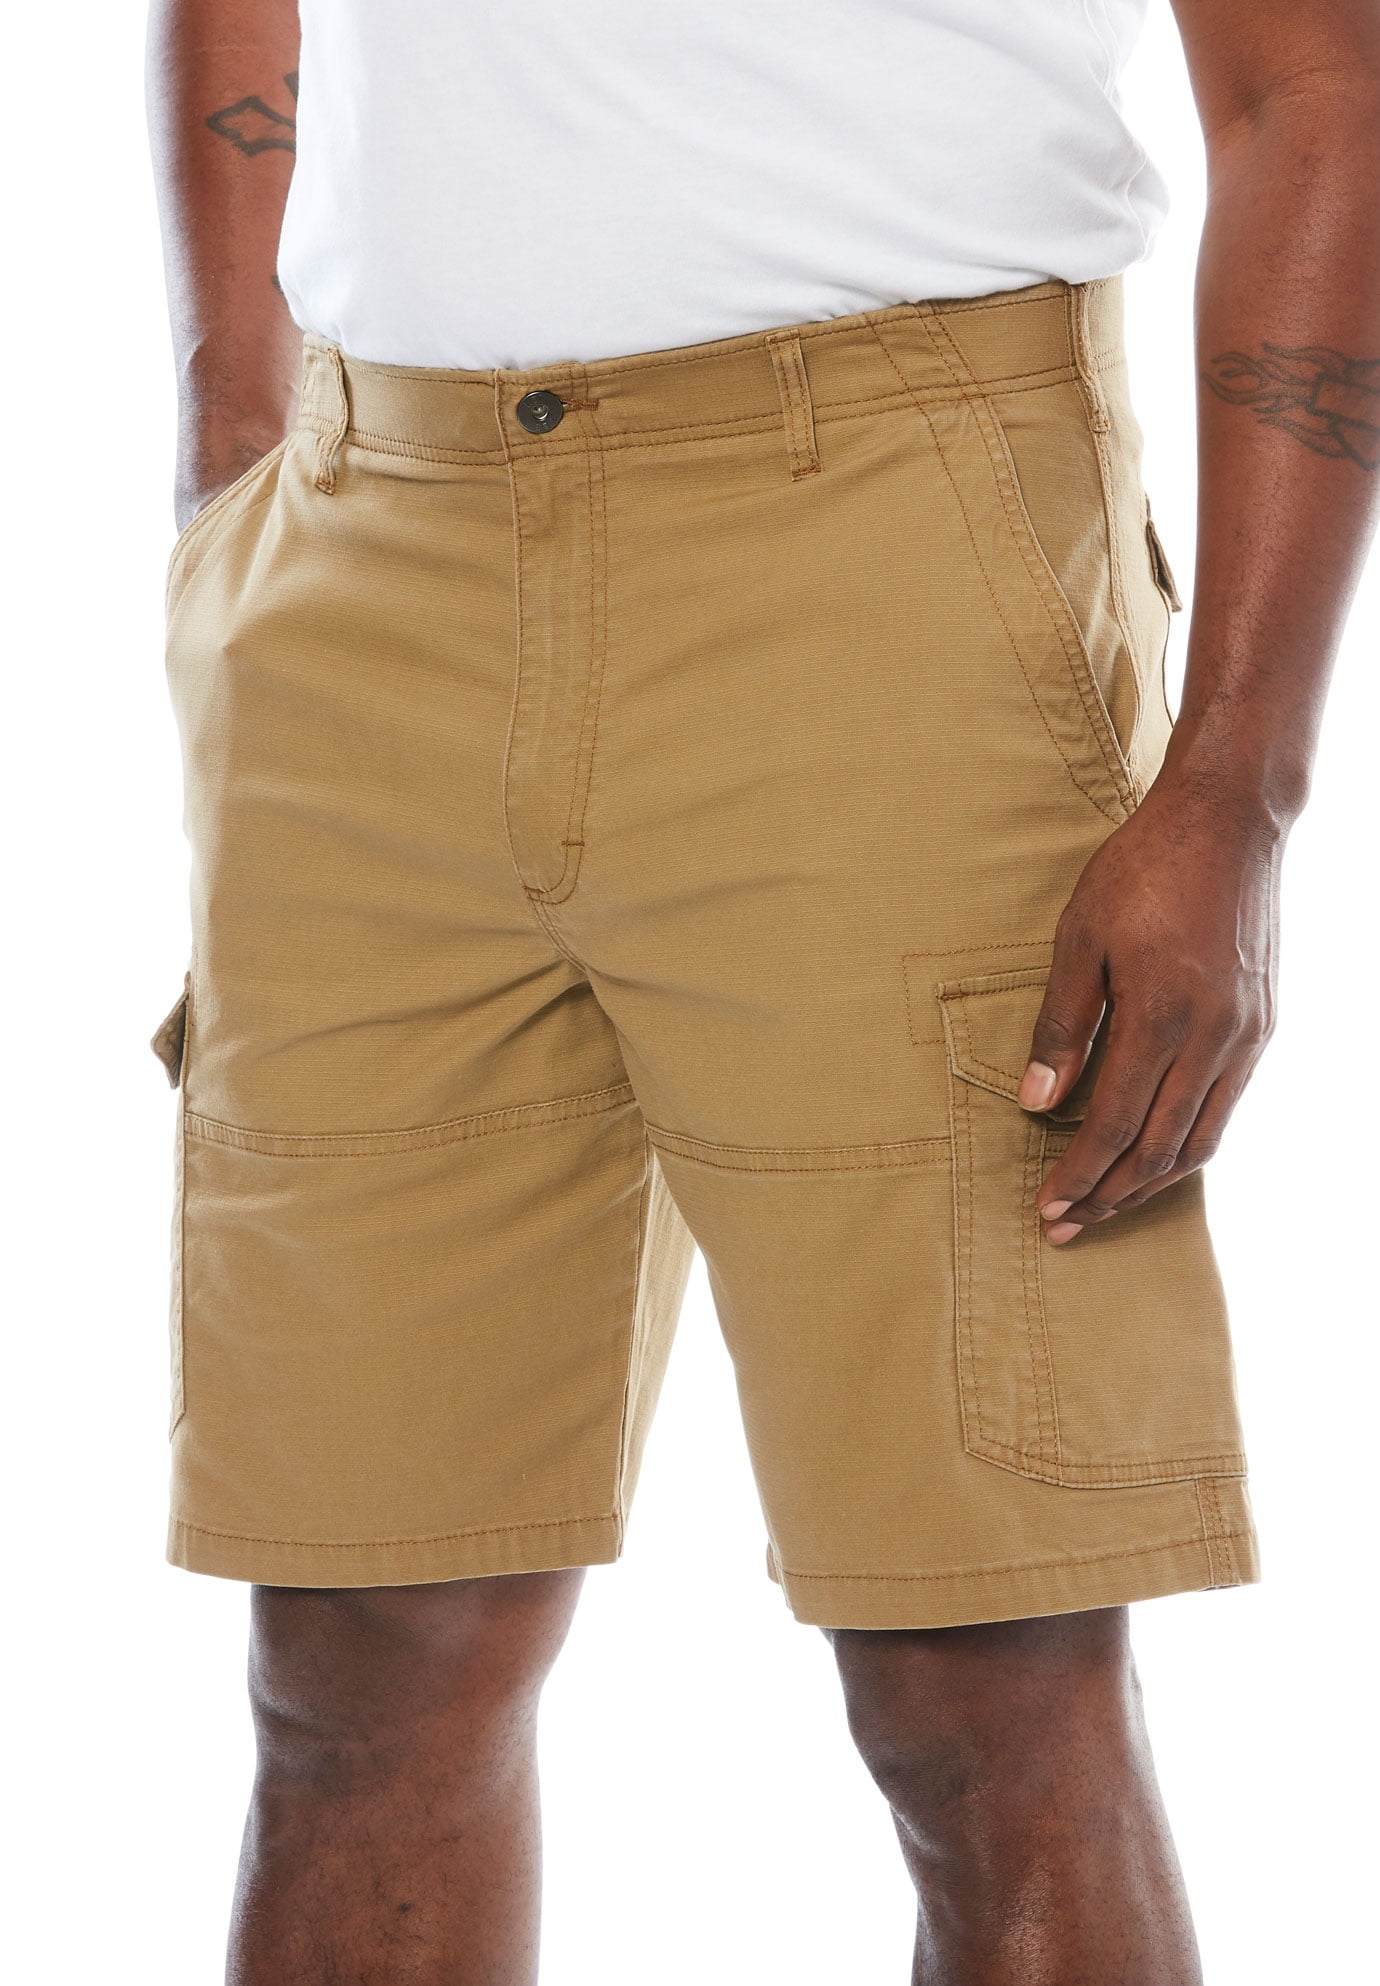 LEE Mens Big & Tall Performance Series Extreme Comfort Cargo Short